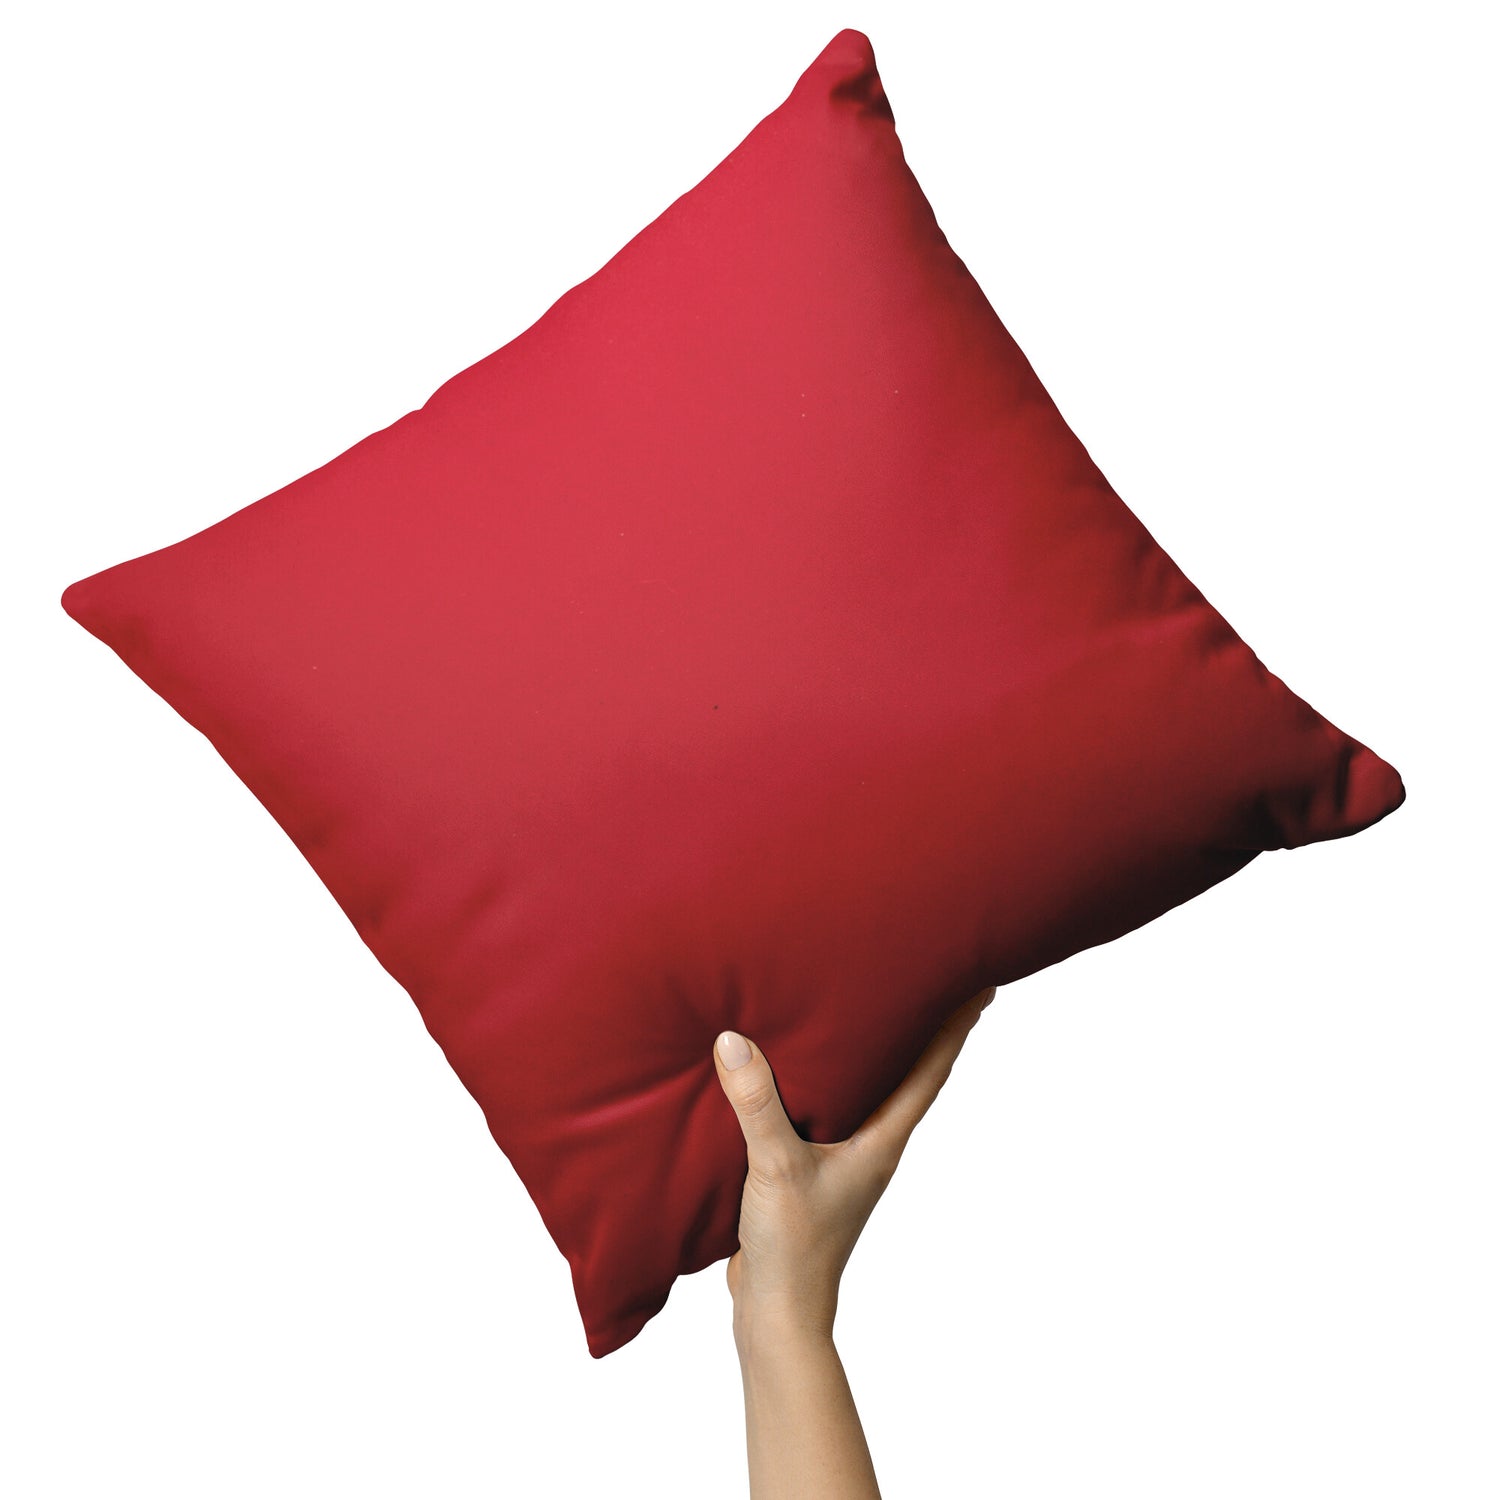 Merry Christmas Darling! Red/Black Pillow - Signs and Seasons Gifts